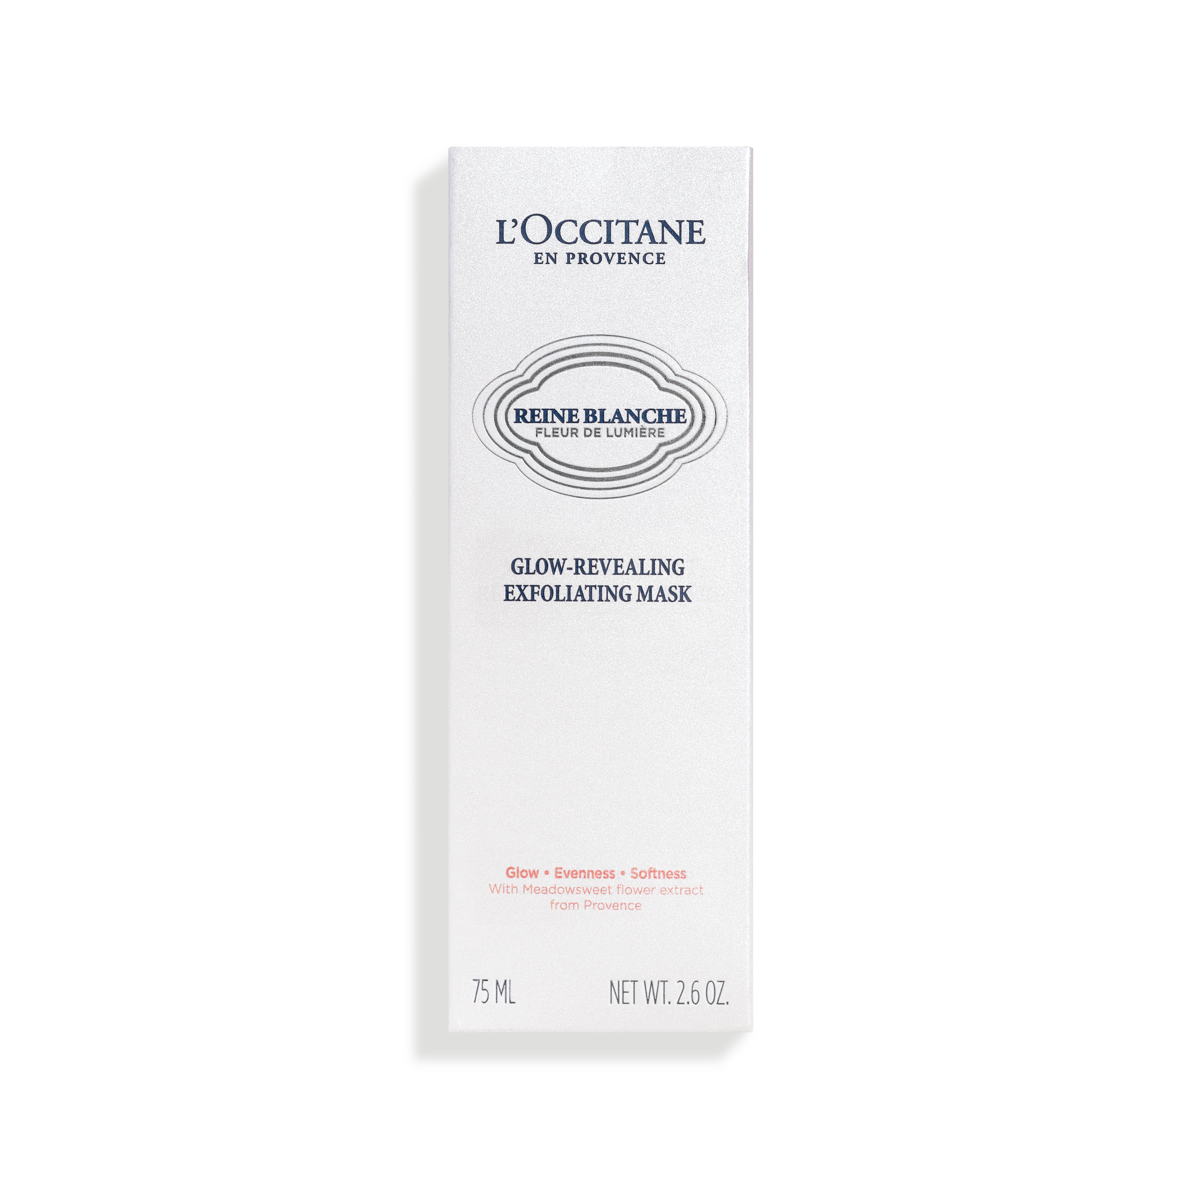 Best Selling Shopify Products on cz.loccitane.com-1